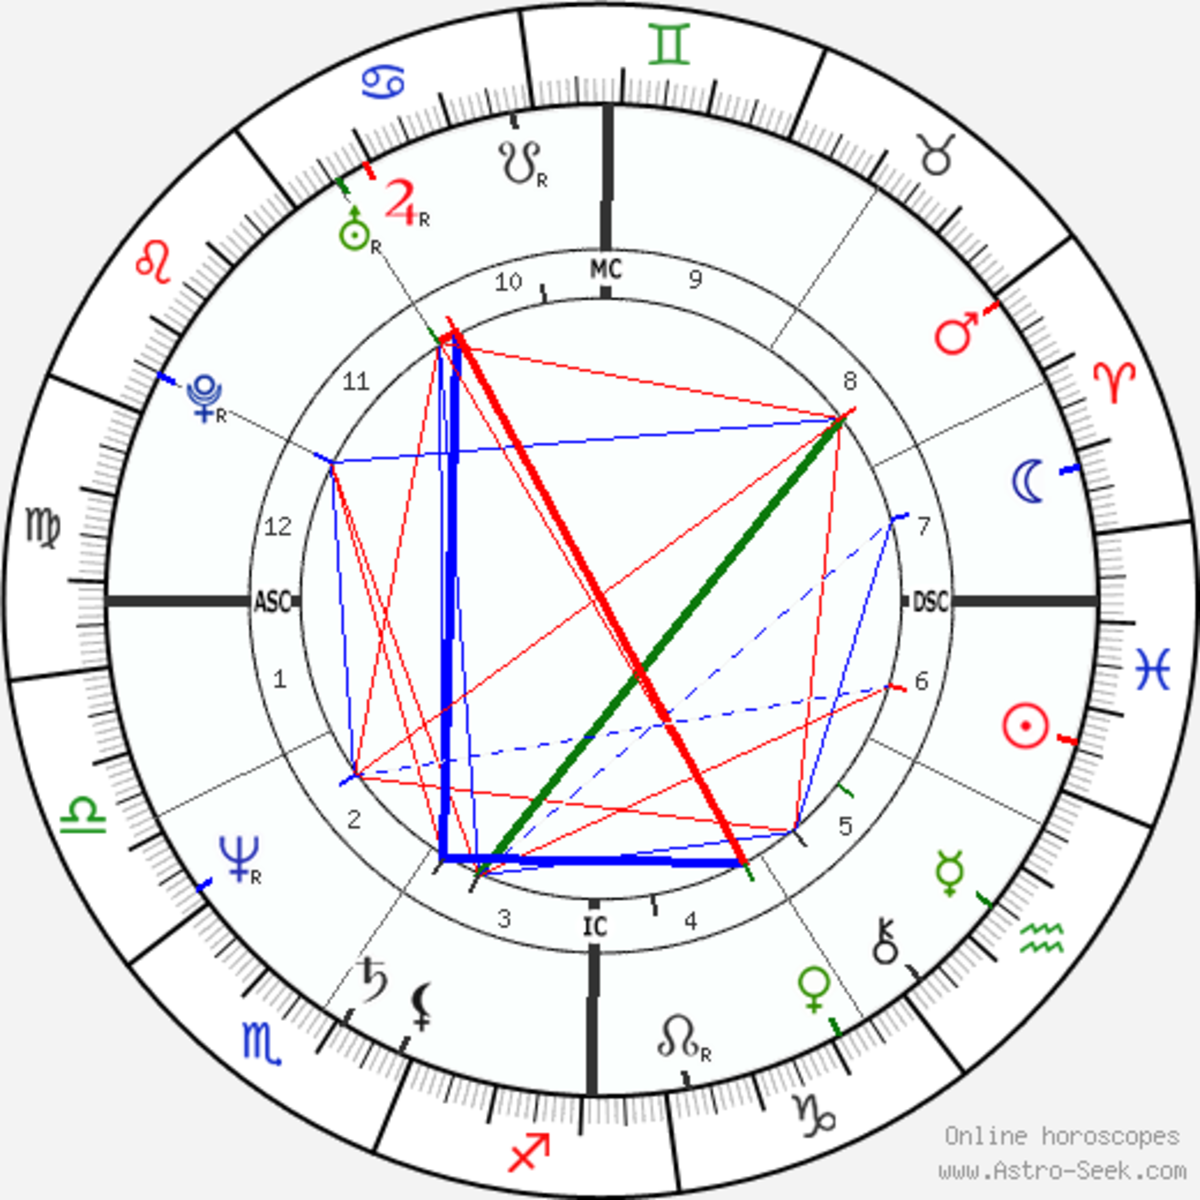 Free Birth Charts and Readings: Five Great Sites | HubPages